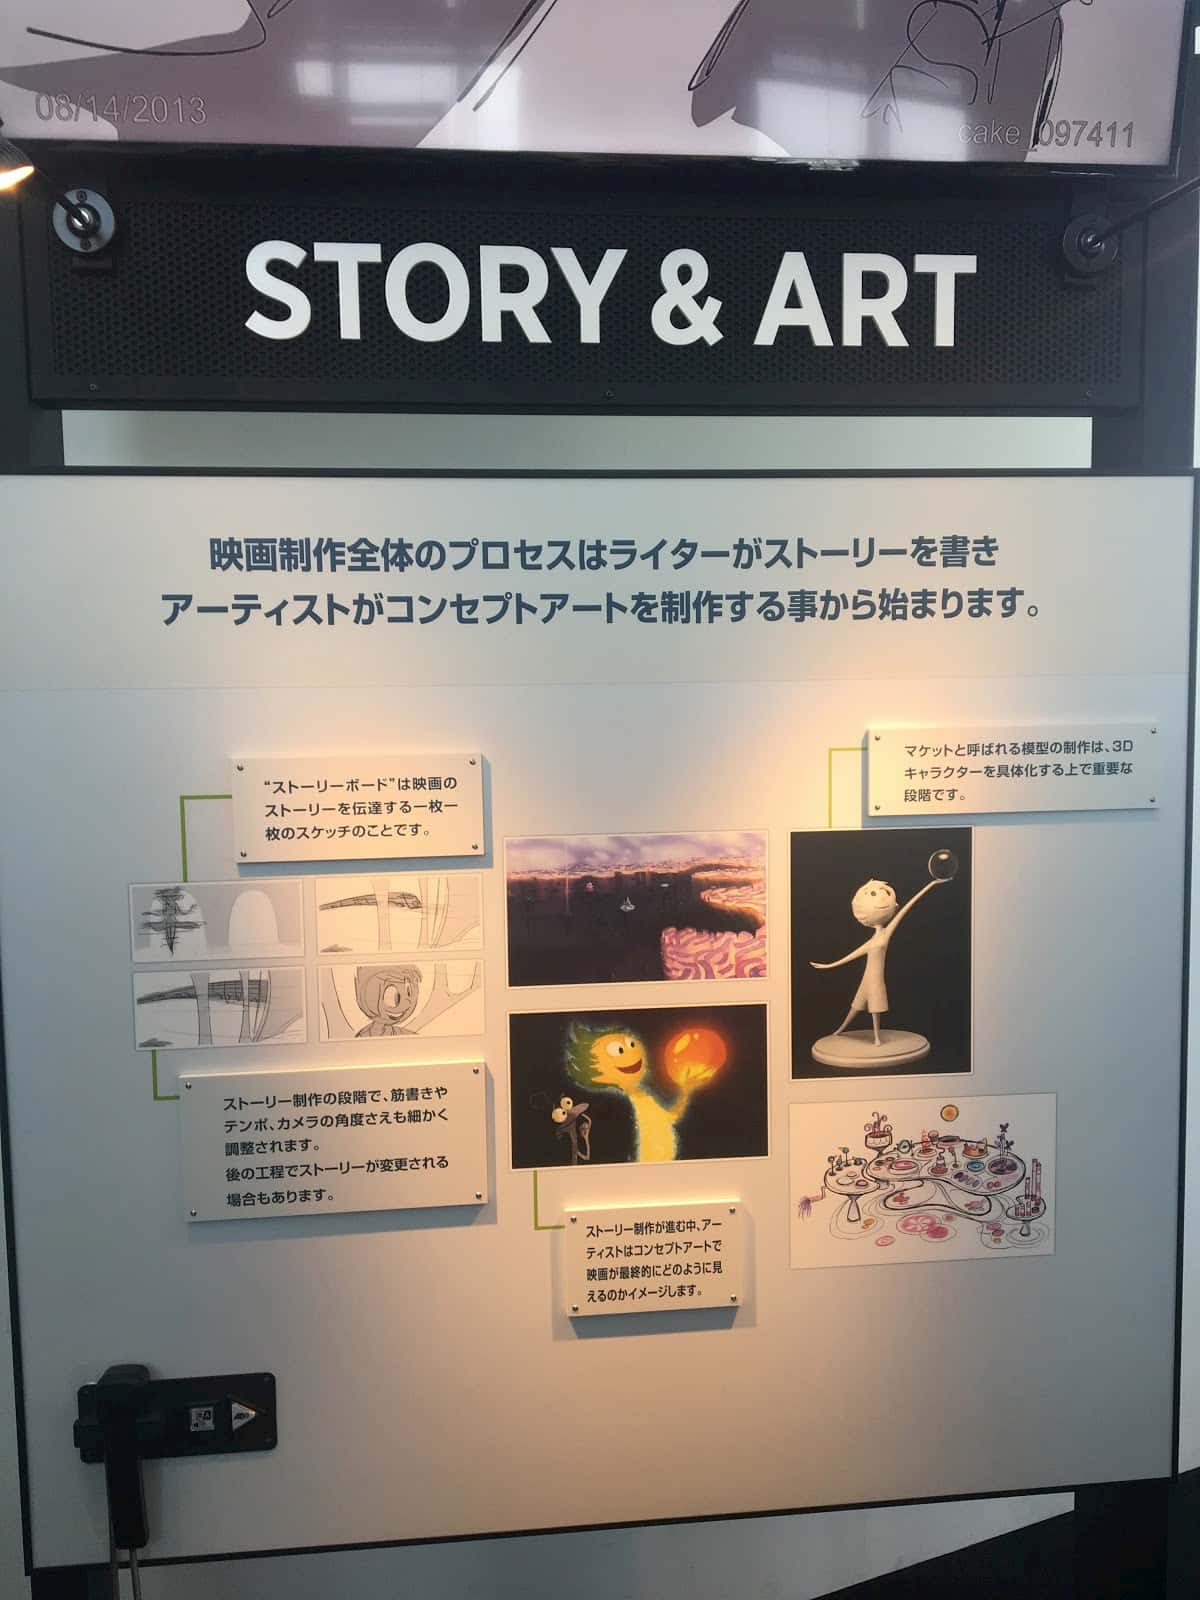 Story and art panel